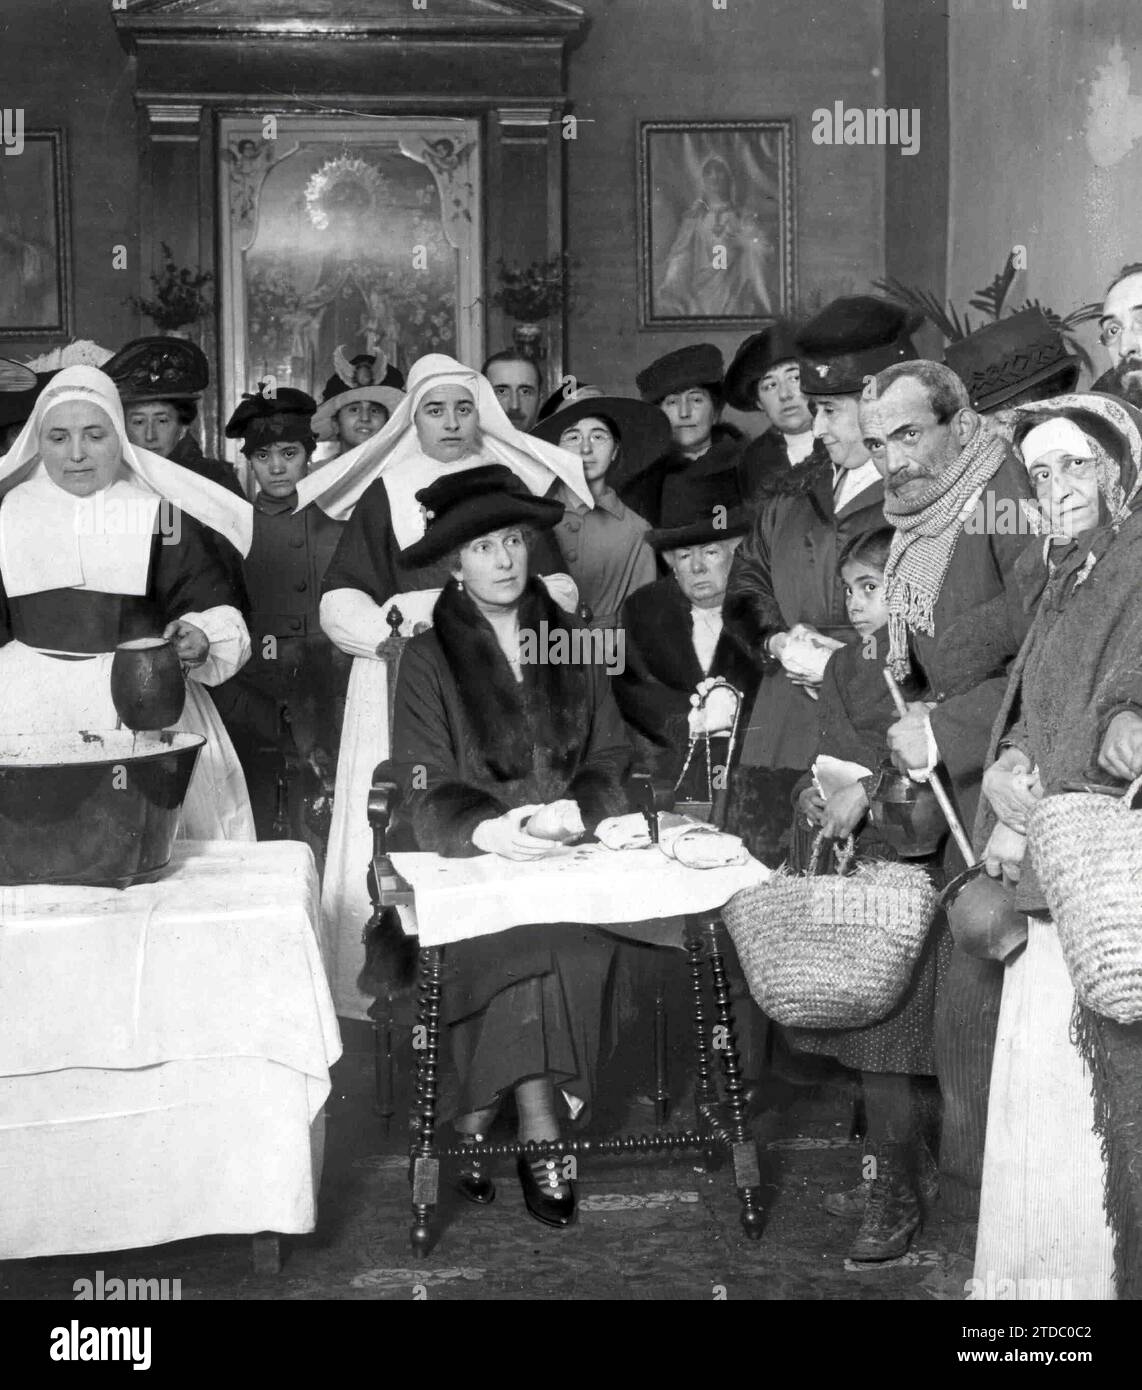 01/07/1918. At the Hospital de Incurables de Nuestra Señora del Carmen, in Madrid. HM Queen Victoria (1) and HRH Infanta Isabel (2) in the distribution of Rations to the Poor Verified yesterday. Credit: Album / Archivo ABC / Ramón Alba Stock Photo